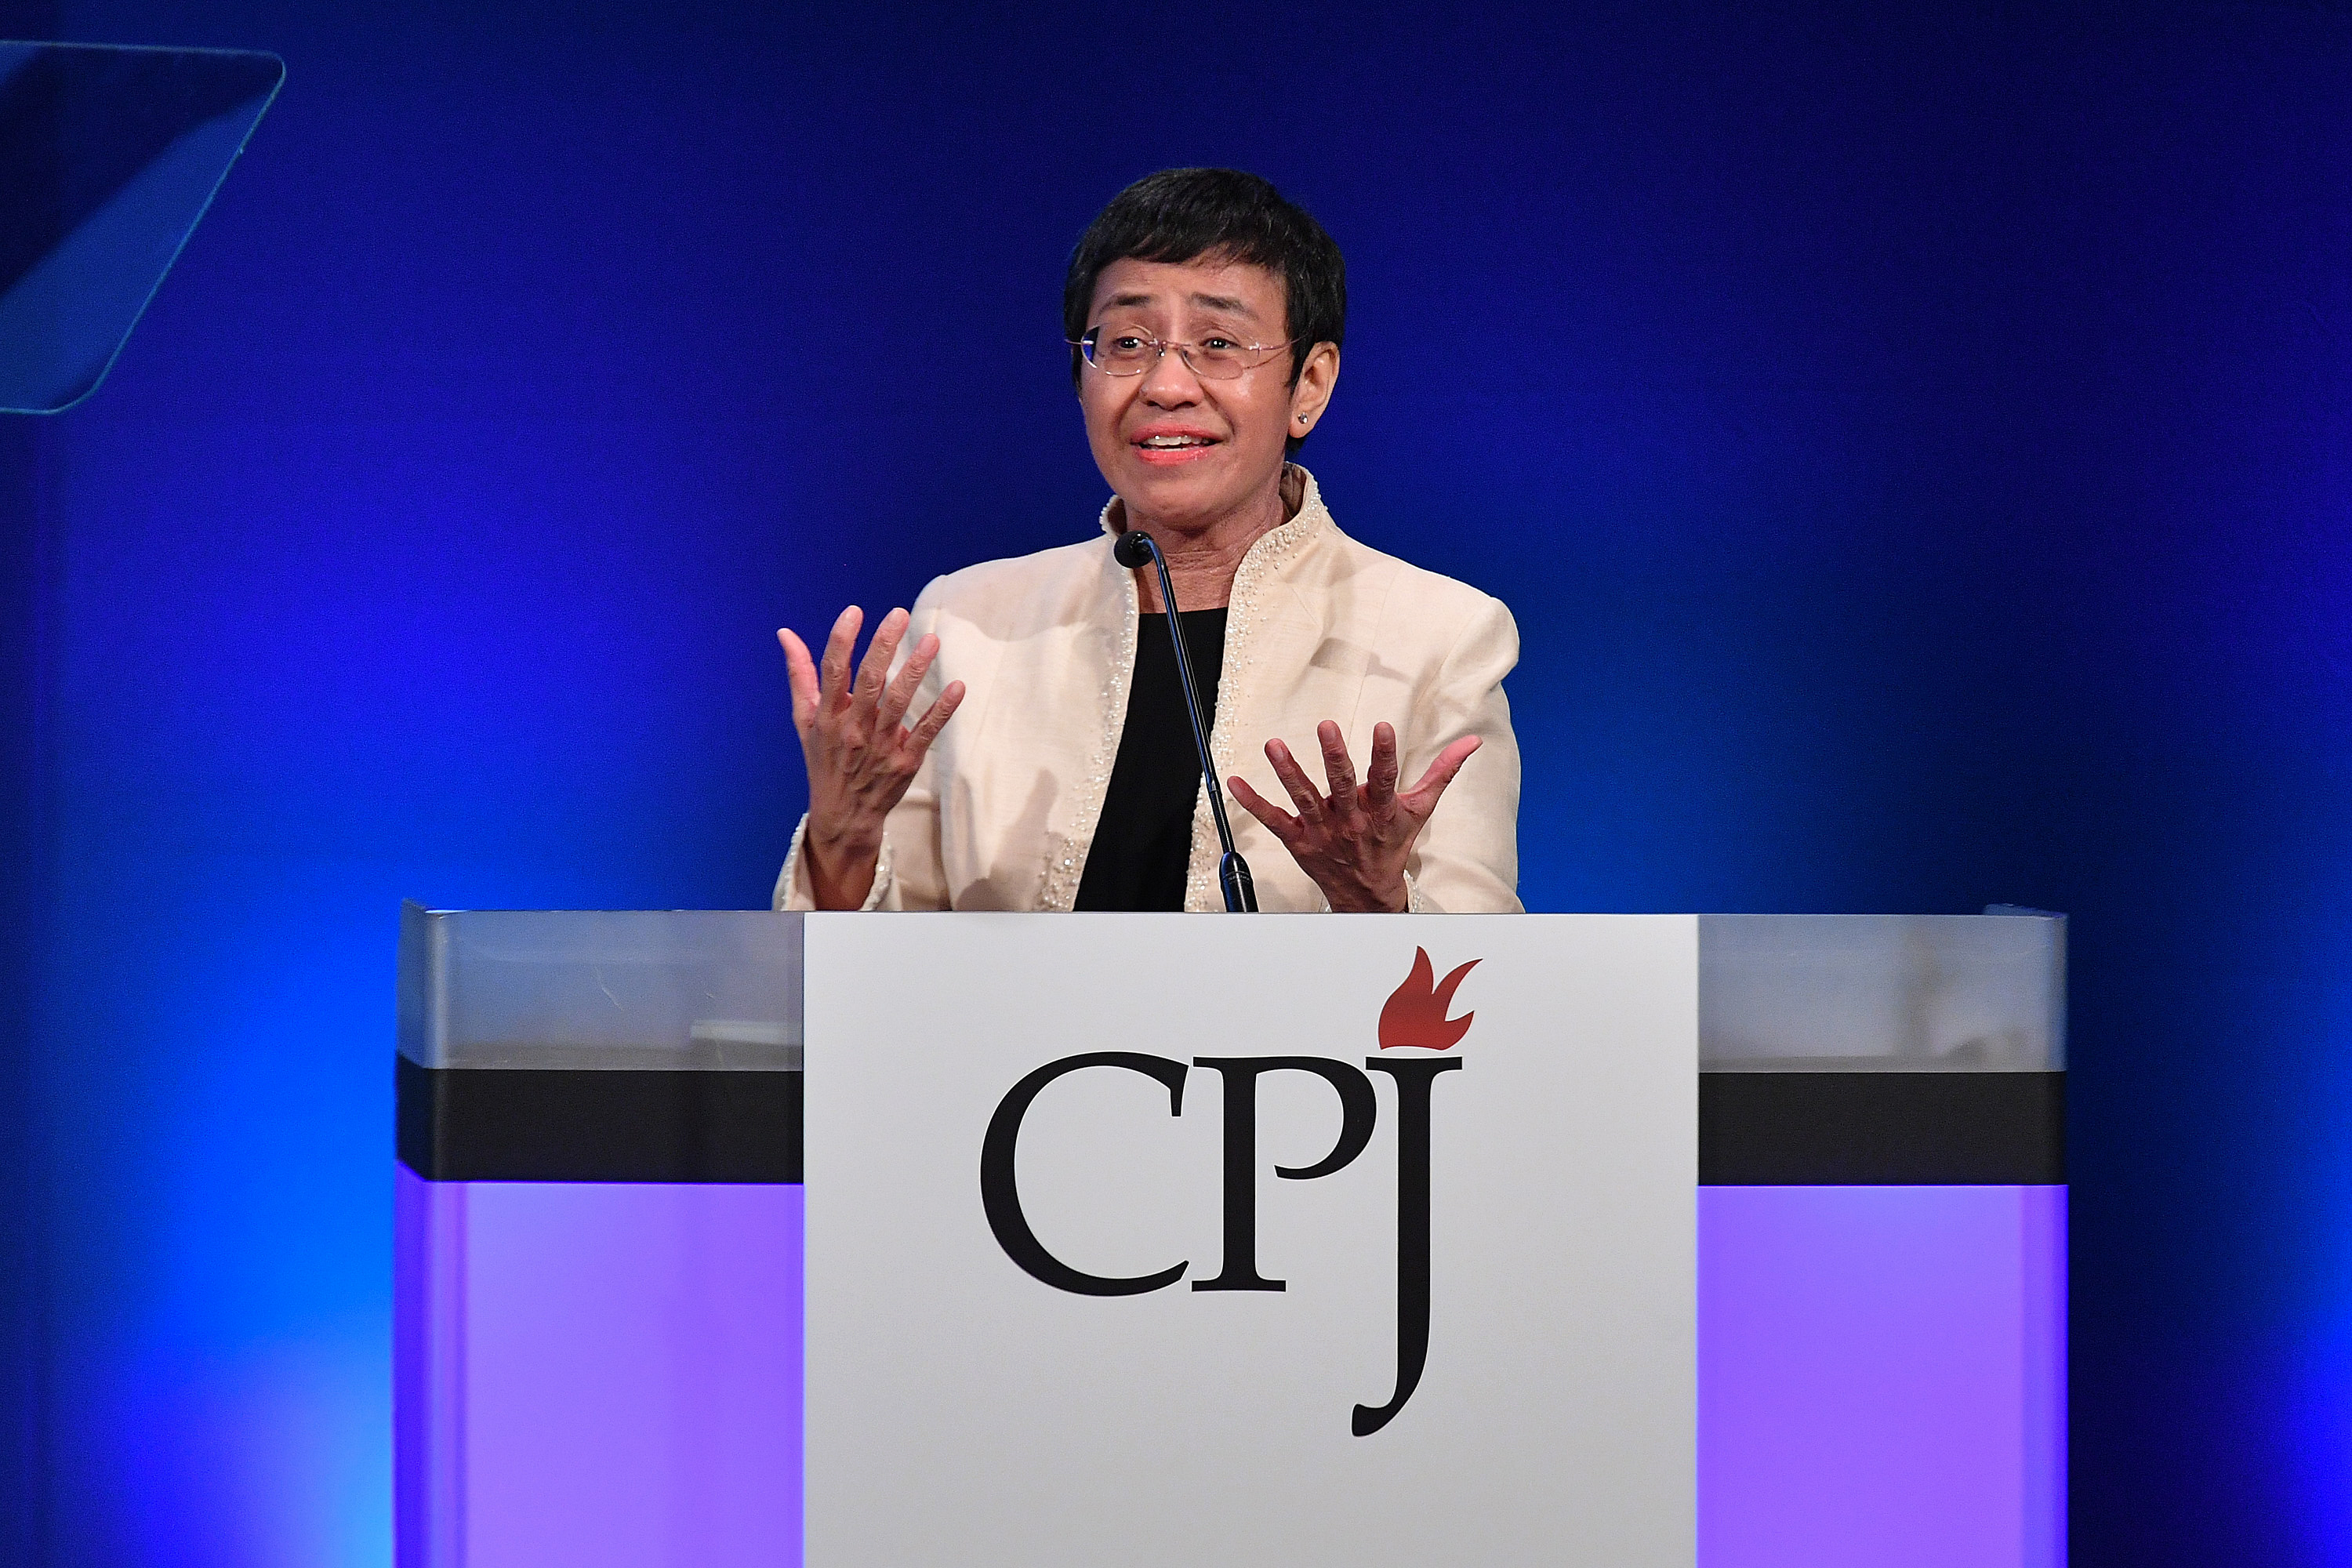 Maria Ressa speaks onstage at the Committee To Protect Journalists' International Press Freedom Awards at the Grand Hyatt on November 20, 2018 in New York City. (Dia Dipasupil/Getty Images for CPJ)